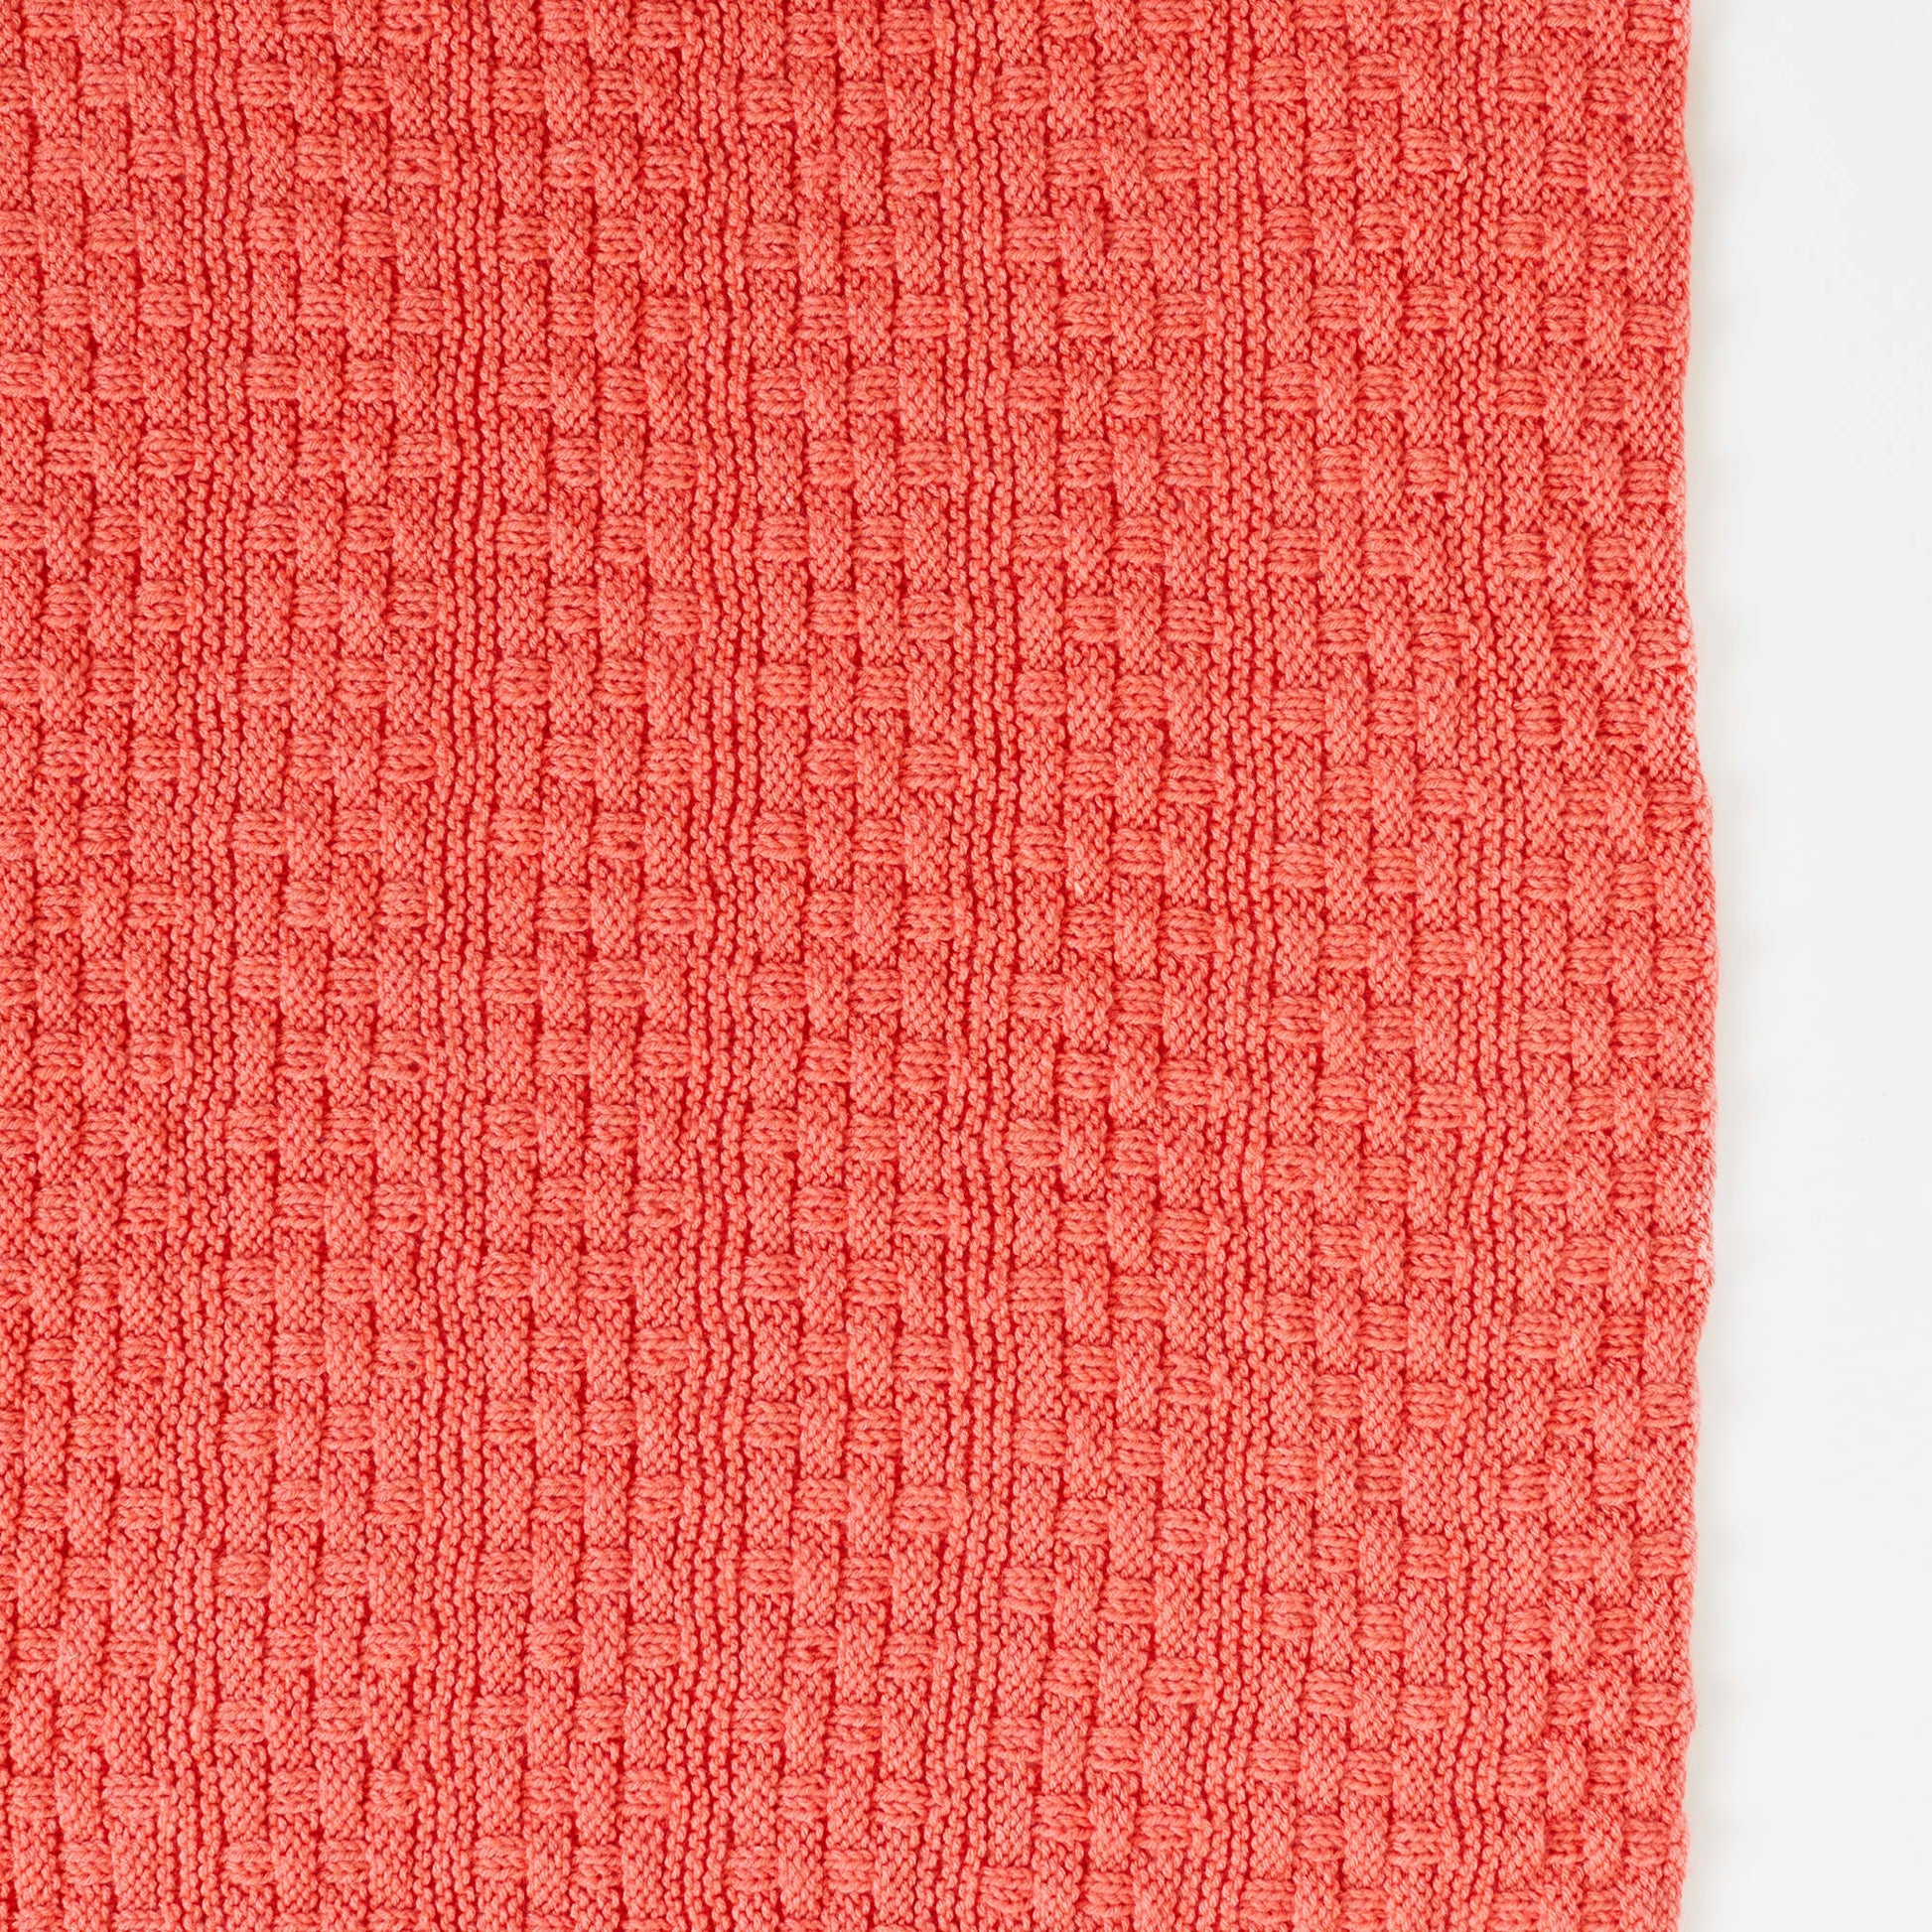 Free Red Heart Bright And Cuddly Basketweave Knit Blanket Pattern